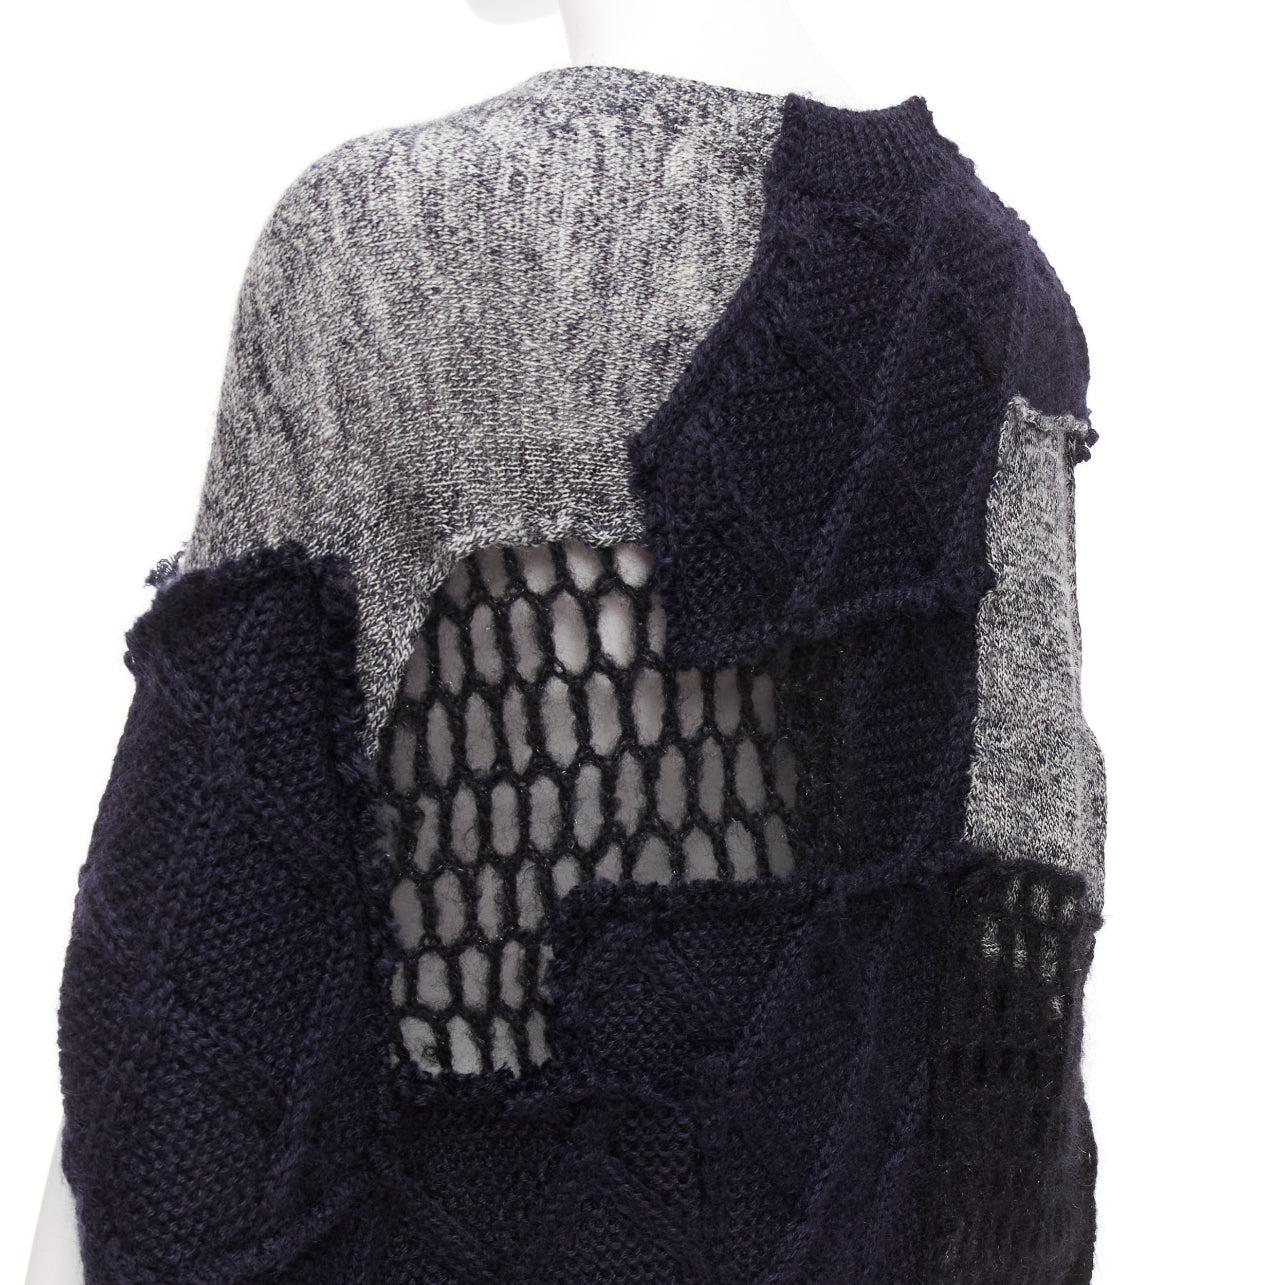 JUNYA WATANABE 2014 navy grey wool mohair blend patchwork loose knit cardigan M
Reference: EALU/A00011
Brand: Junya Watanabe
Collection: 2014
Material: Wool, Mohair, Blend
Color: Grey, Navy
Pattern: Solid
Closure: Pullover
Extra Details: Cape design